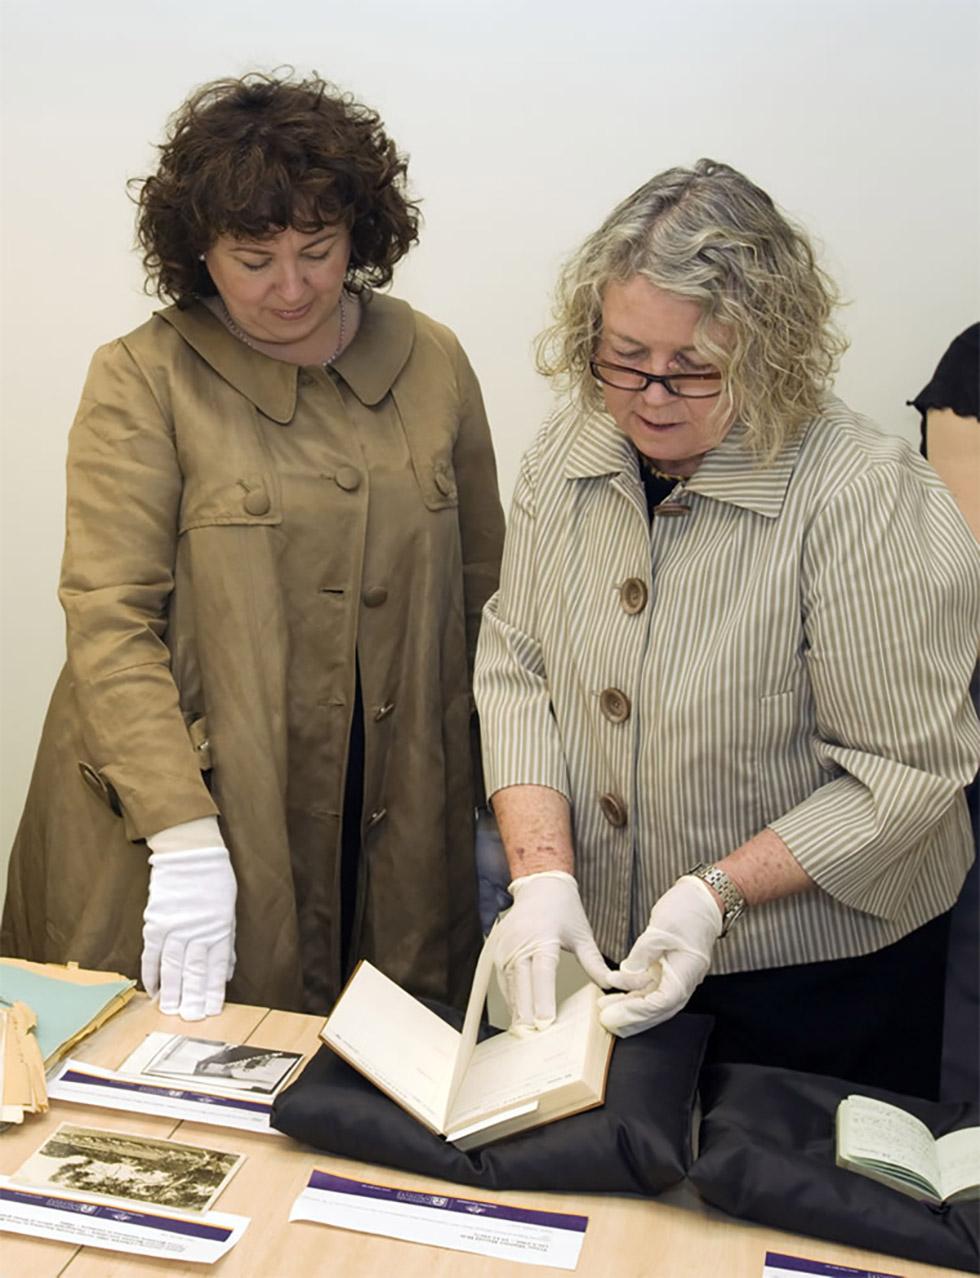 Thérèse Rein at the National Archives of Australia viewing a diary from Prime Minister Holt Series, 2009.